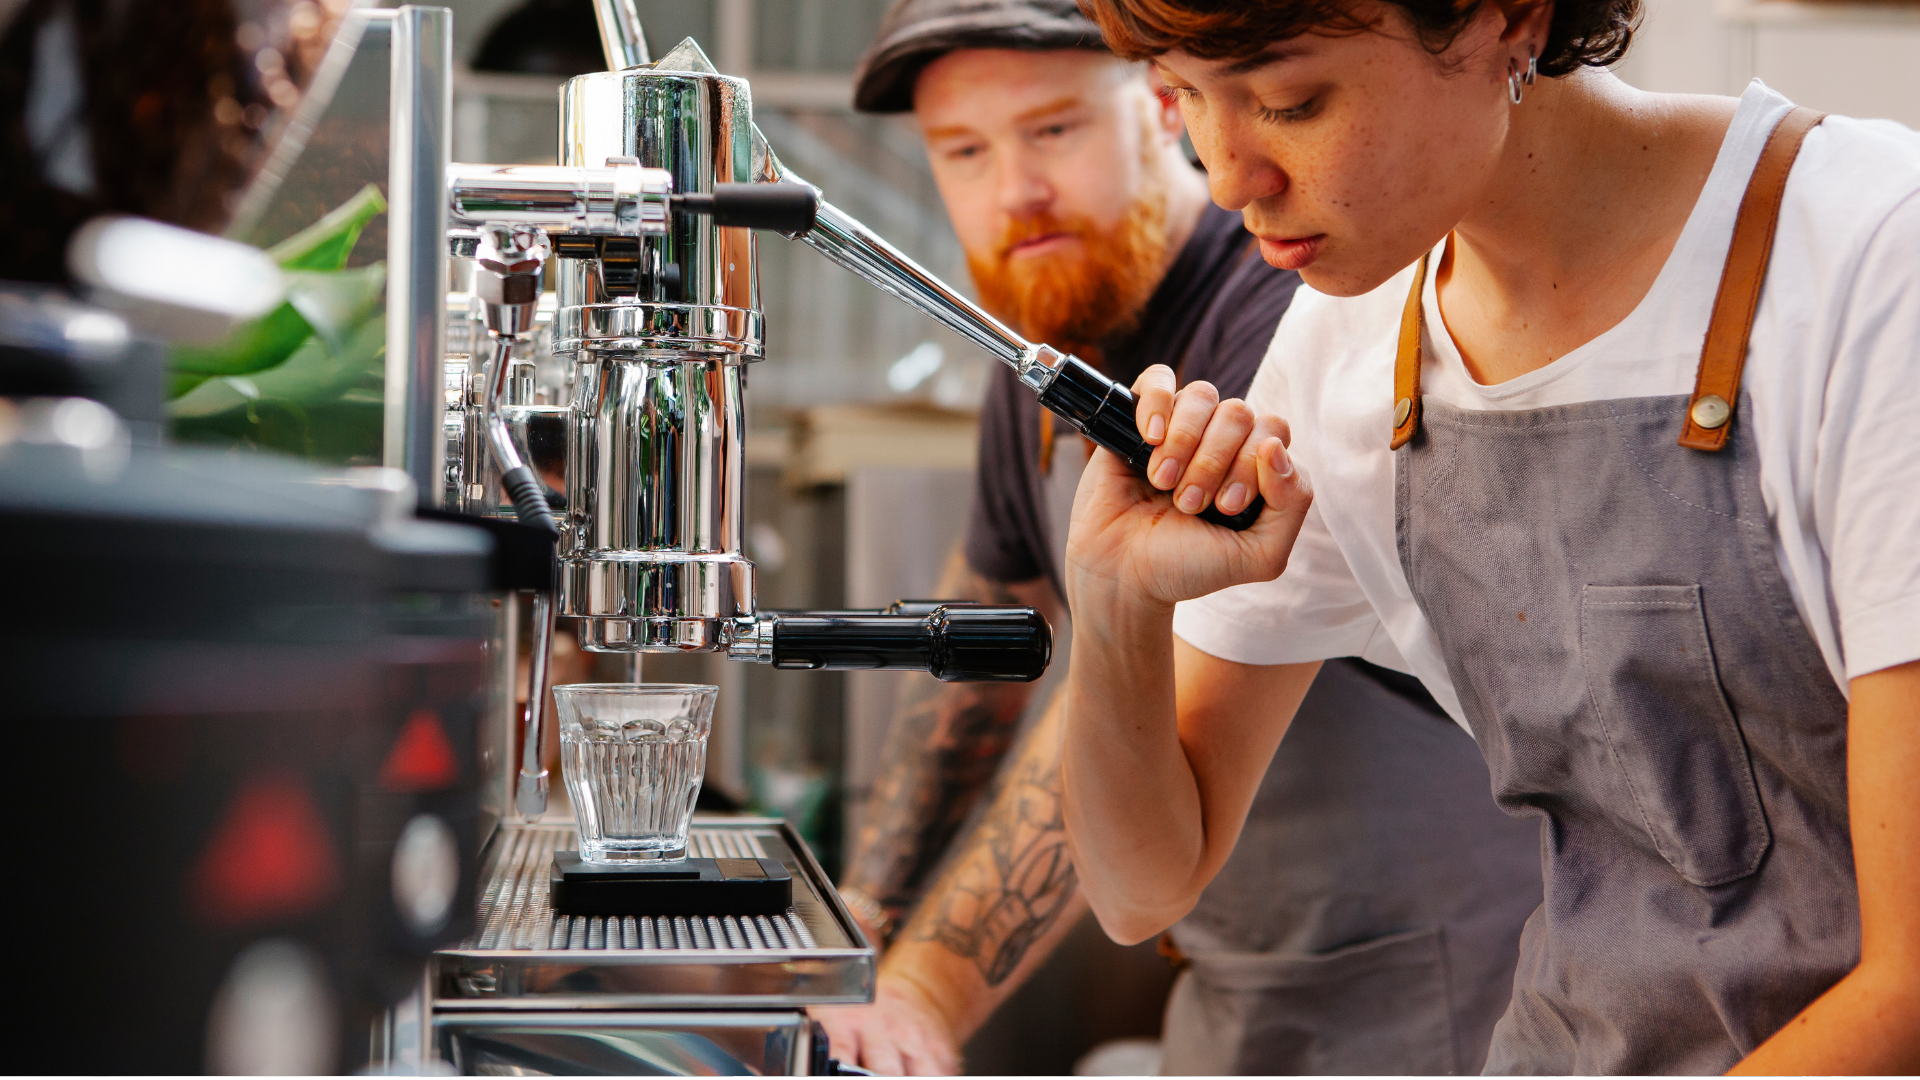 A barista extracts an espresso shot for a mobile coffee business.